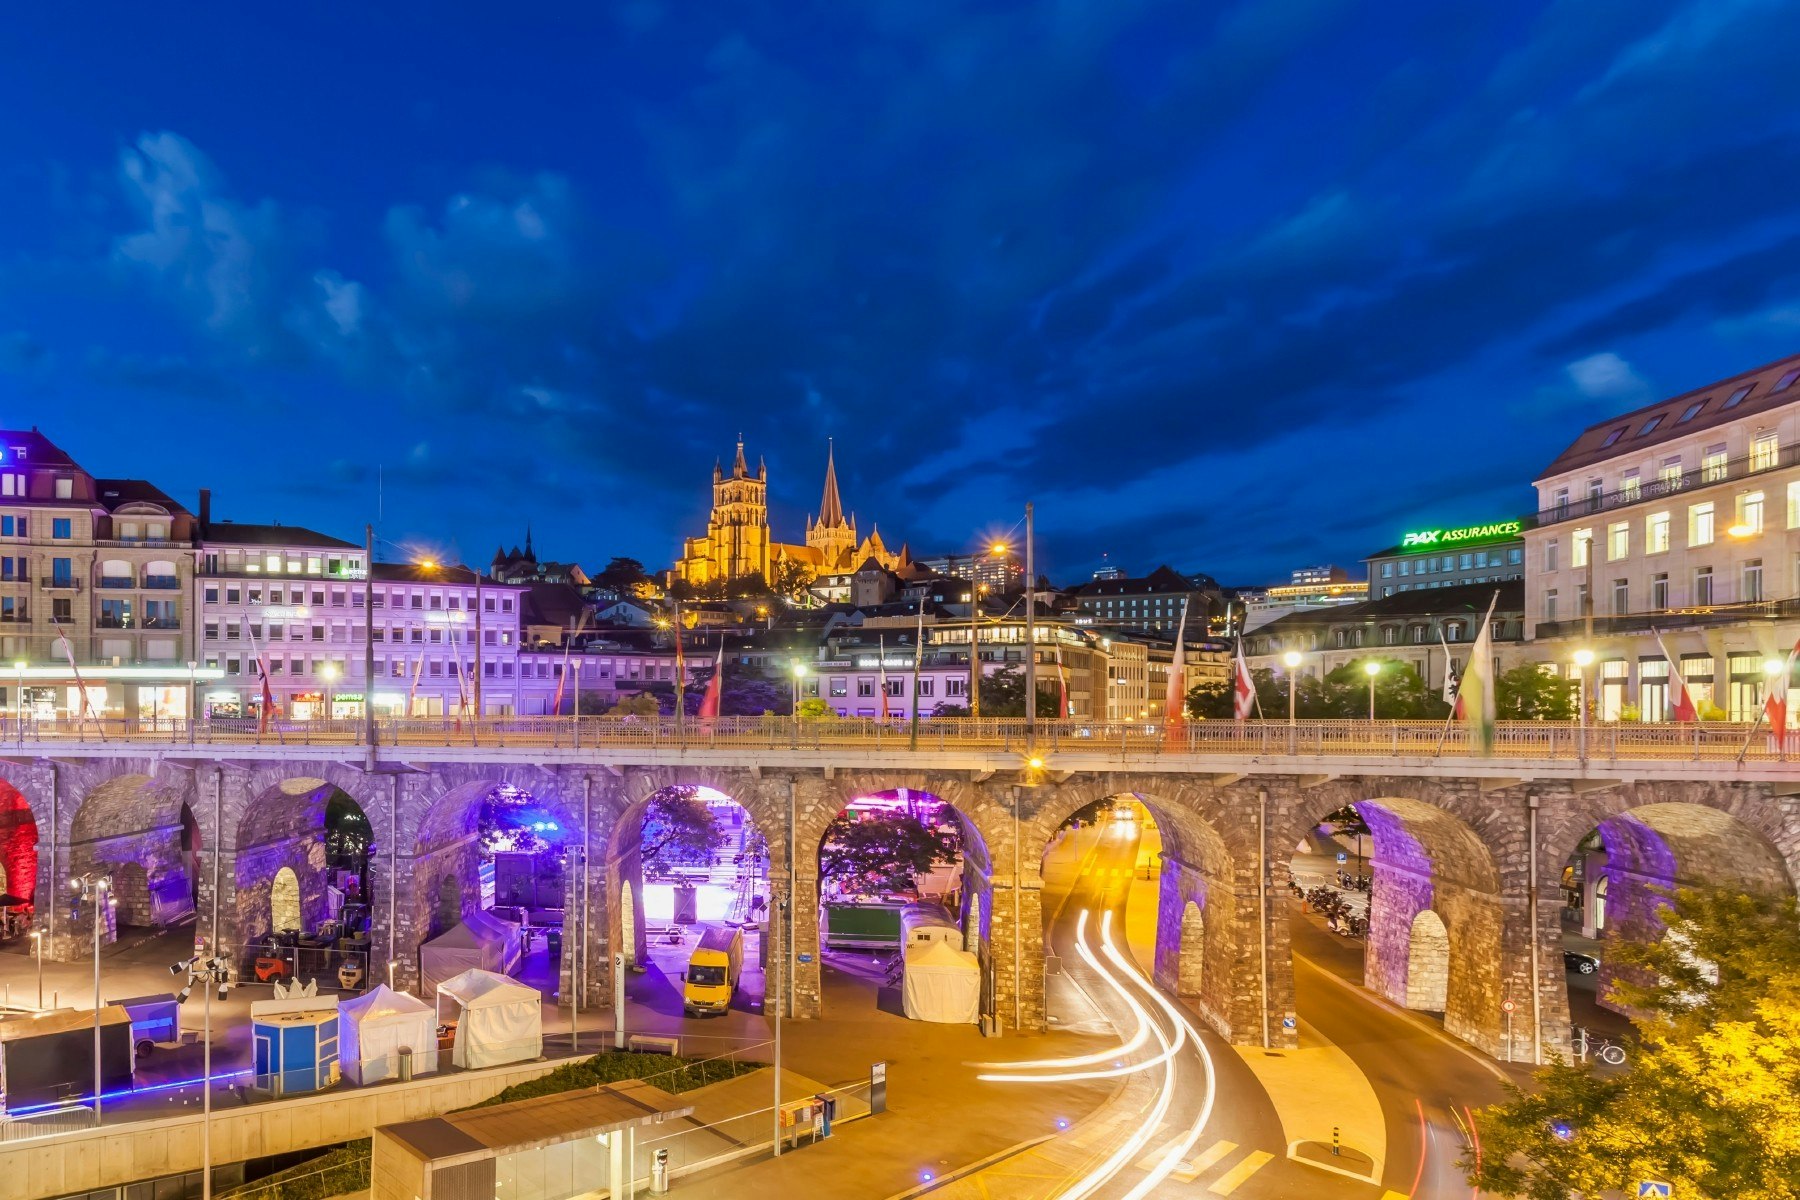 Vibrant colours light up the archways under the Grand Pont Bridge in Lausanne at night